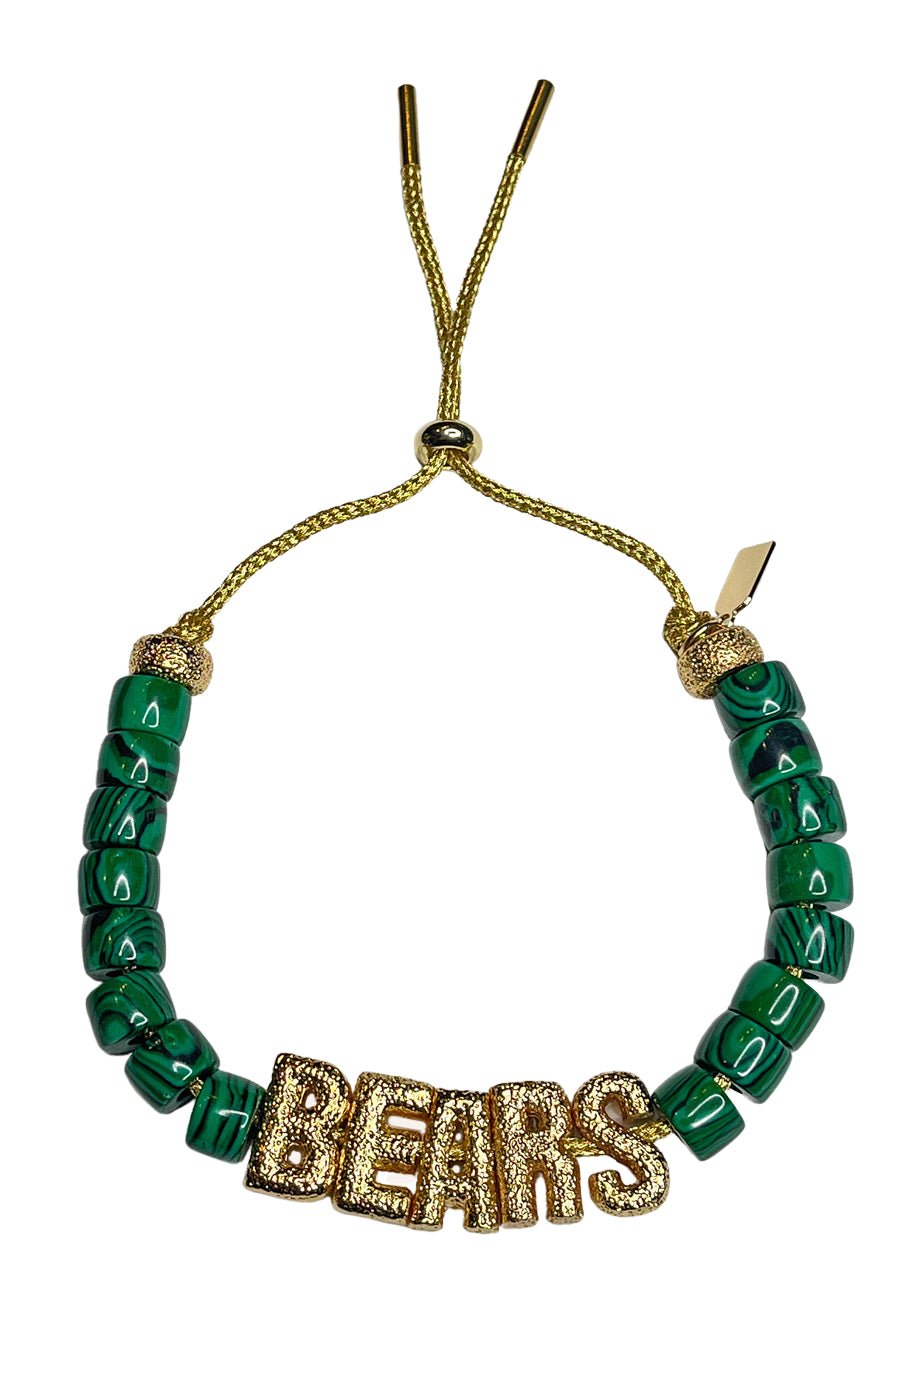 Green Malachite Eye Candy "Bears" ID Bracelet - Lucky Star Jewels - Color Game